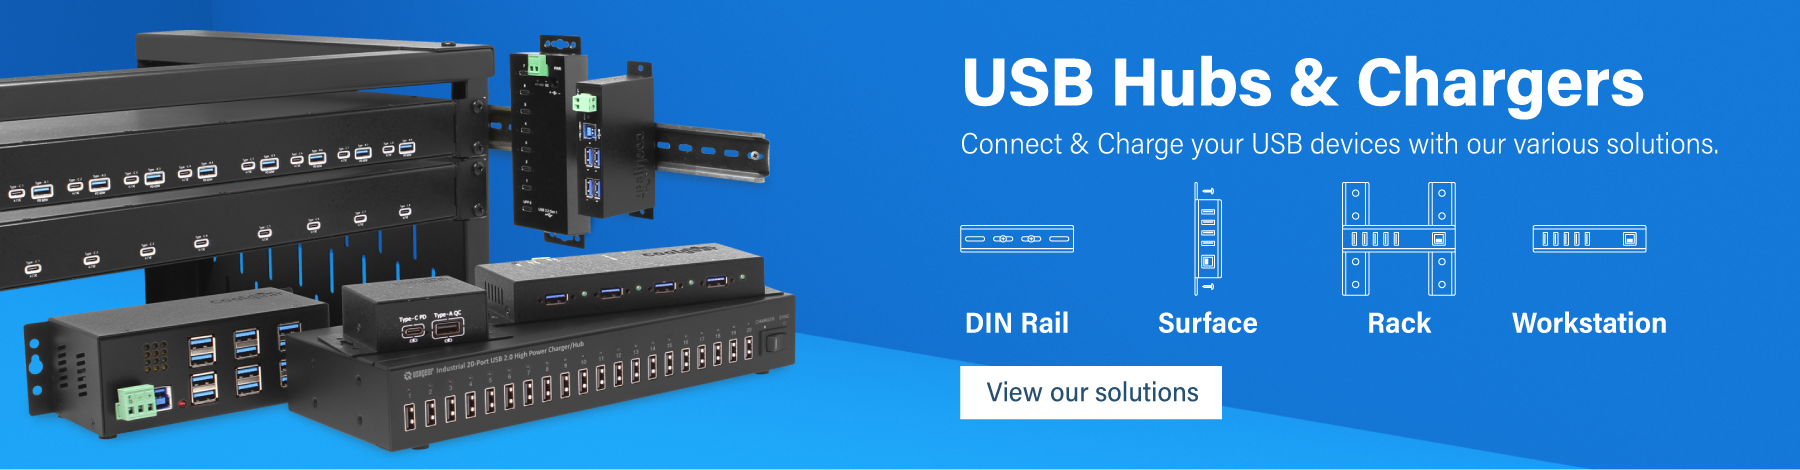 USB Hubs and Chargers